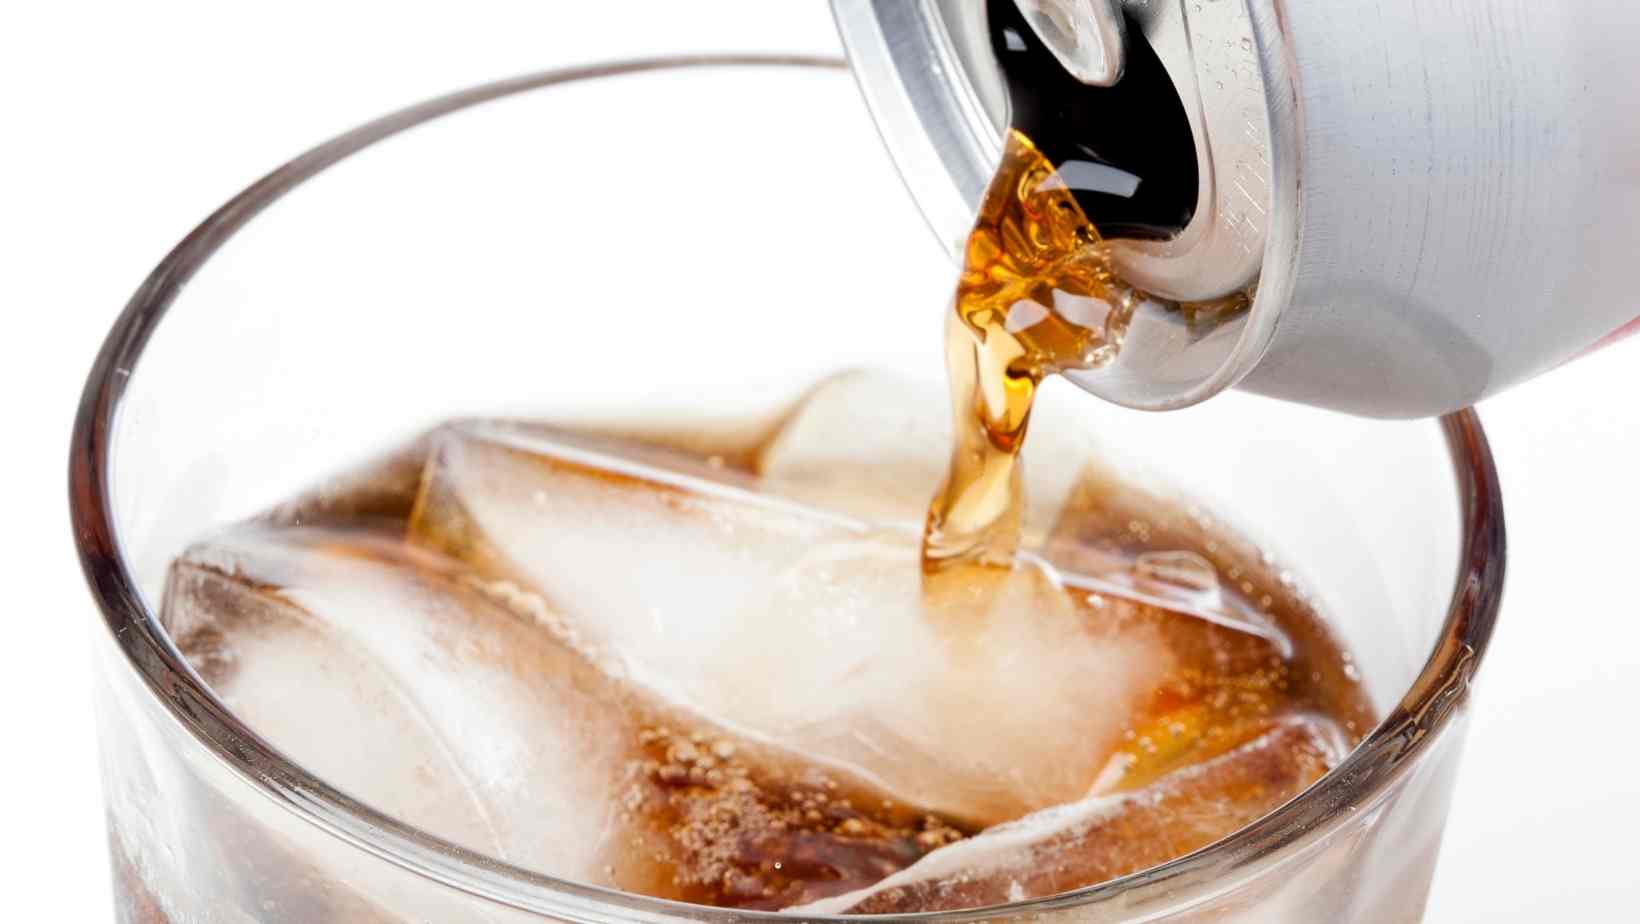 Diet soda - Beverages That Boost Your Heart Health